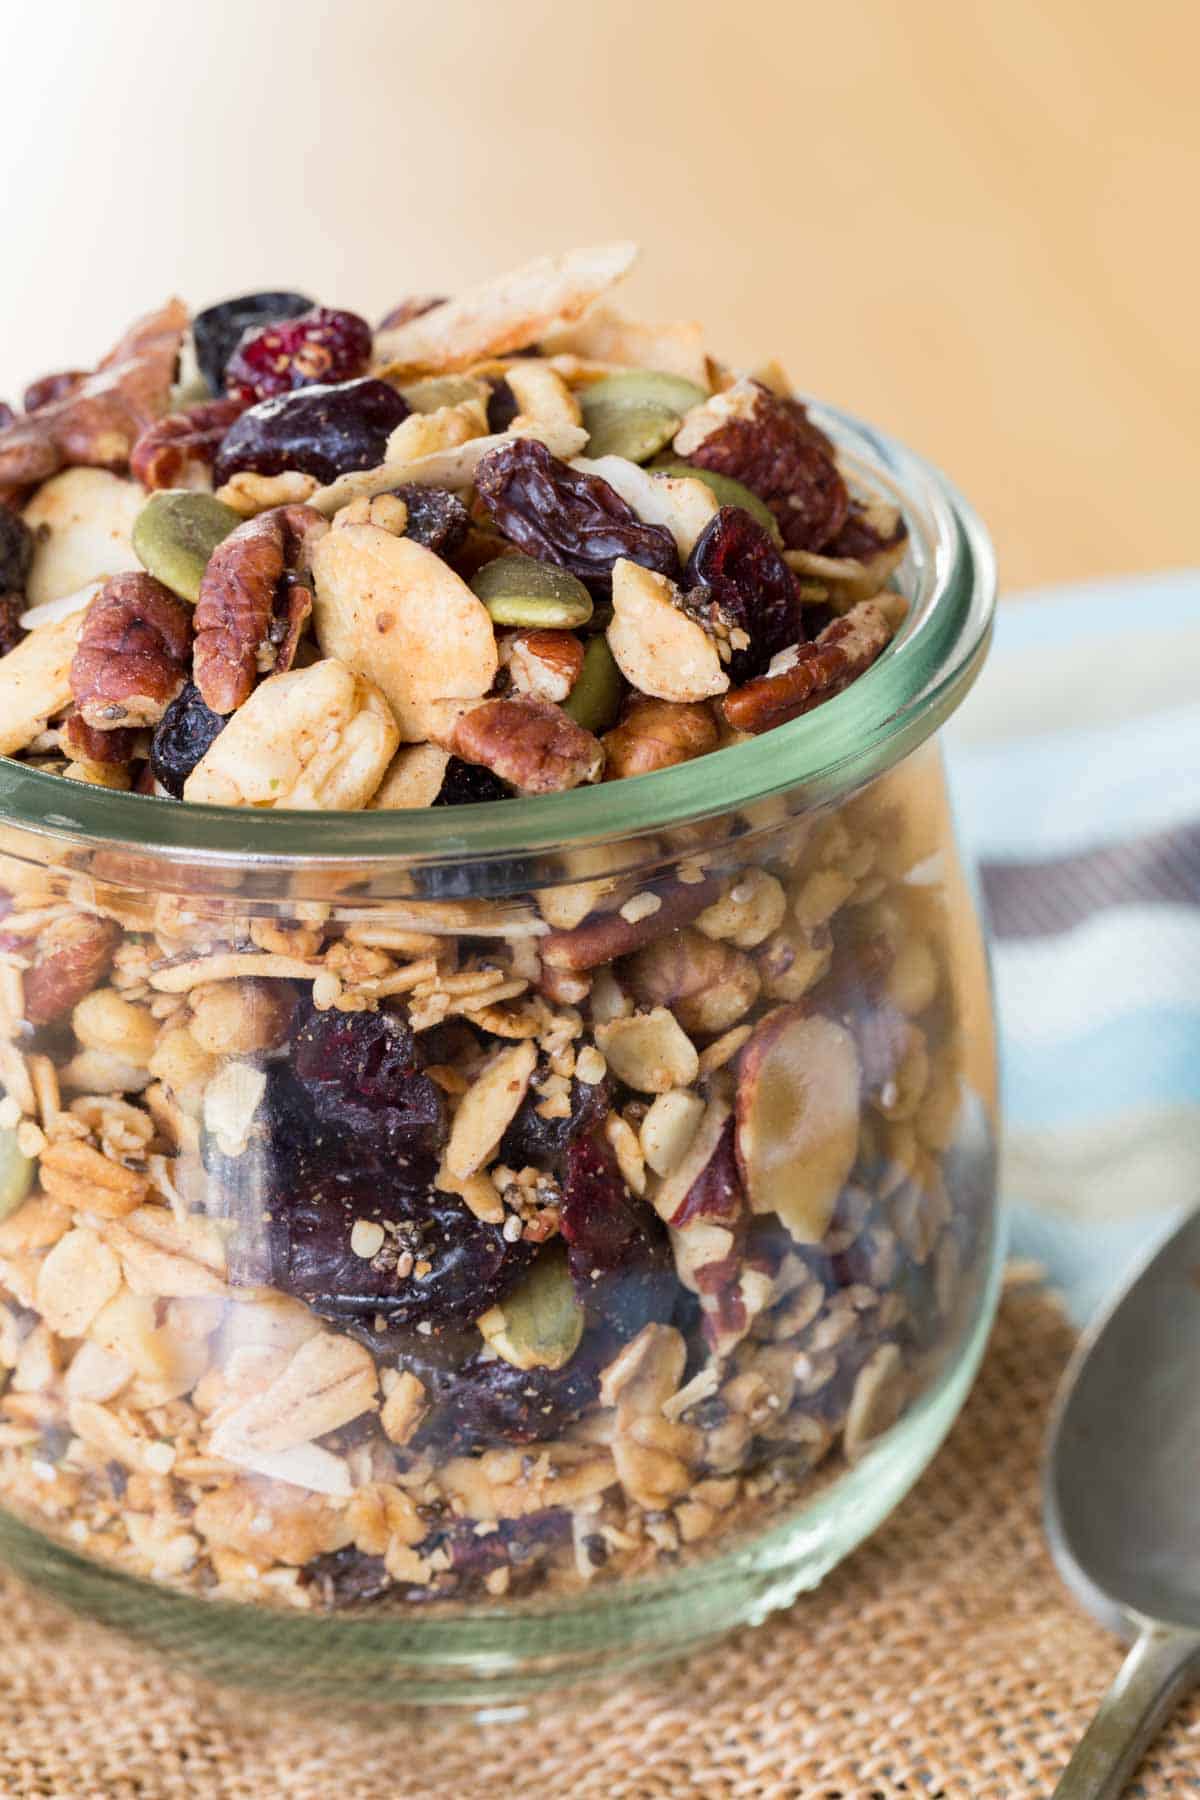 A jar of granola with oats, nuts, and dried fruit.